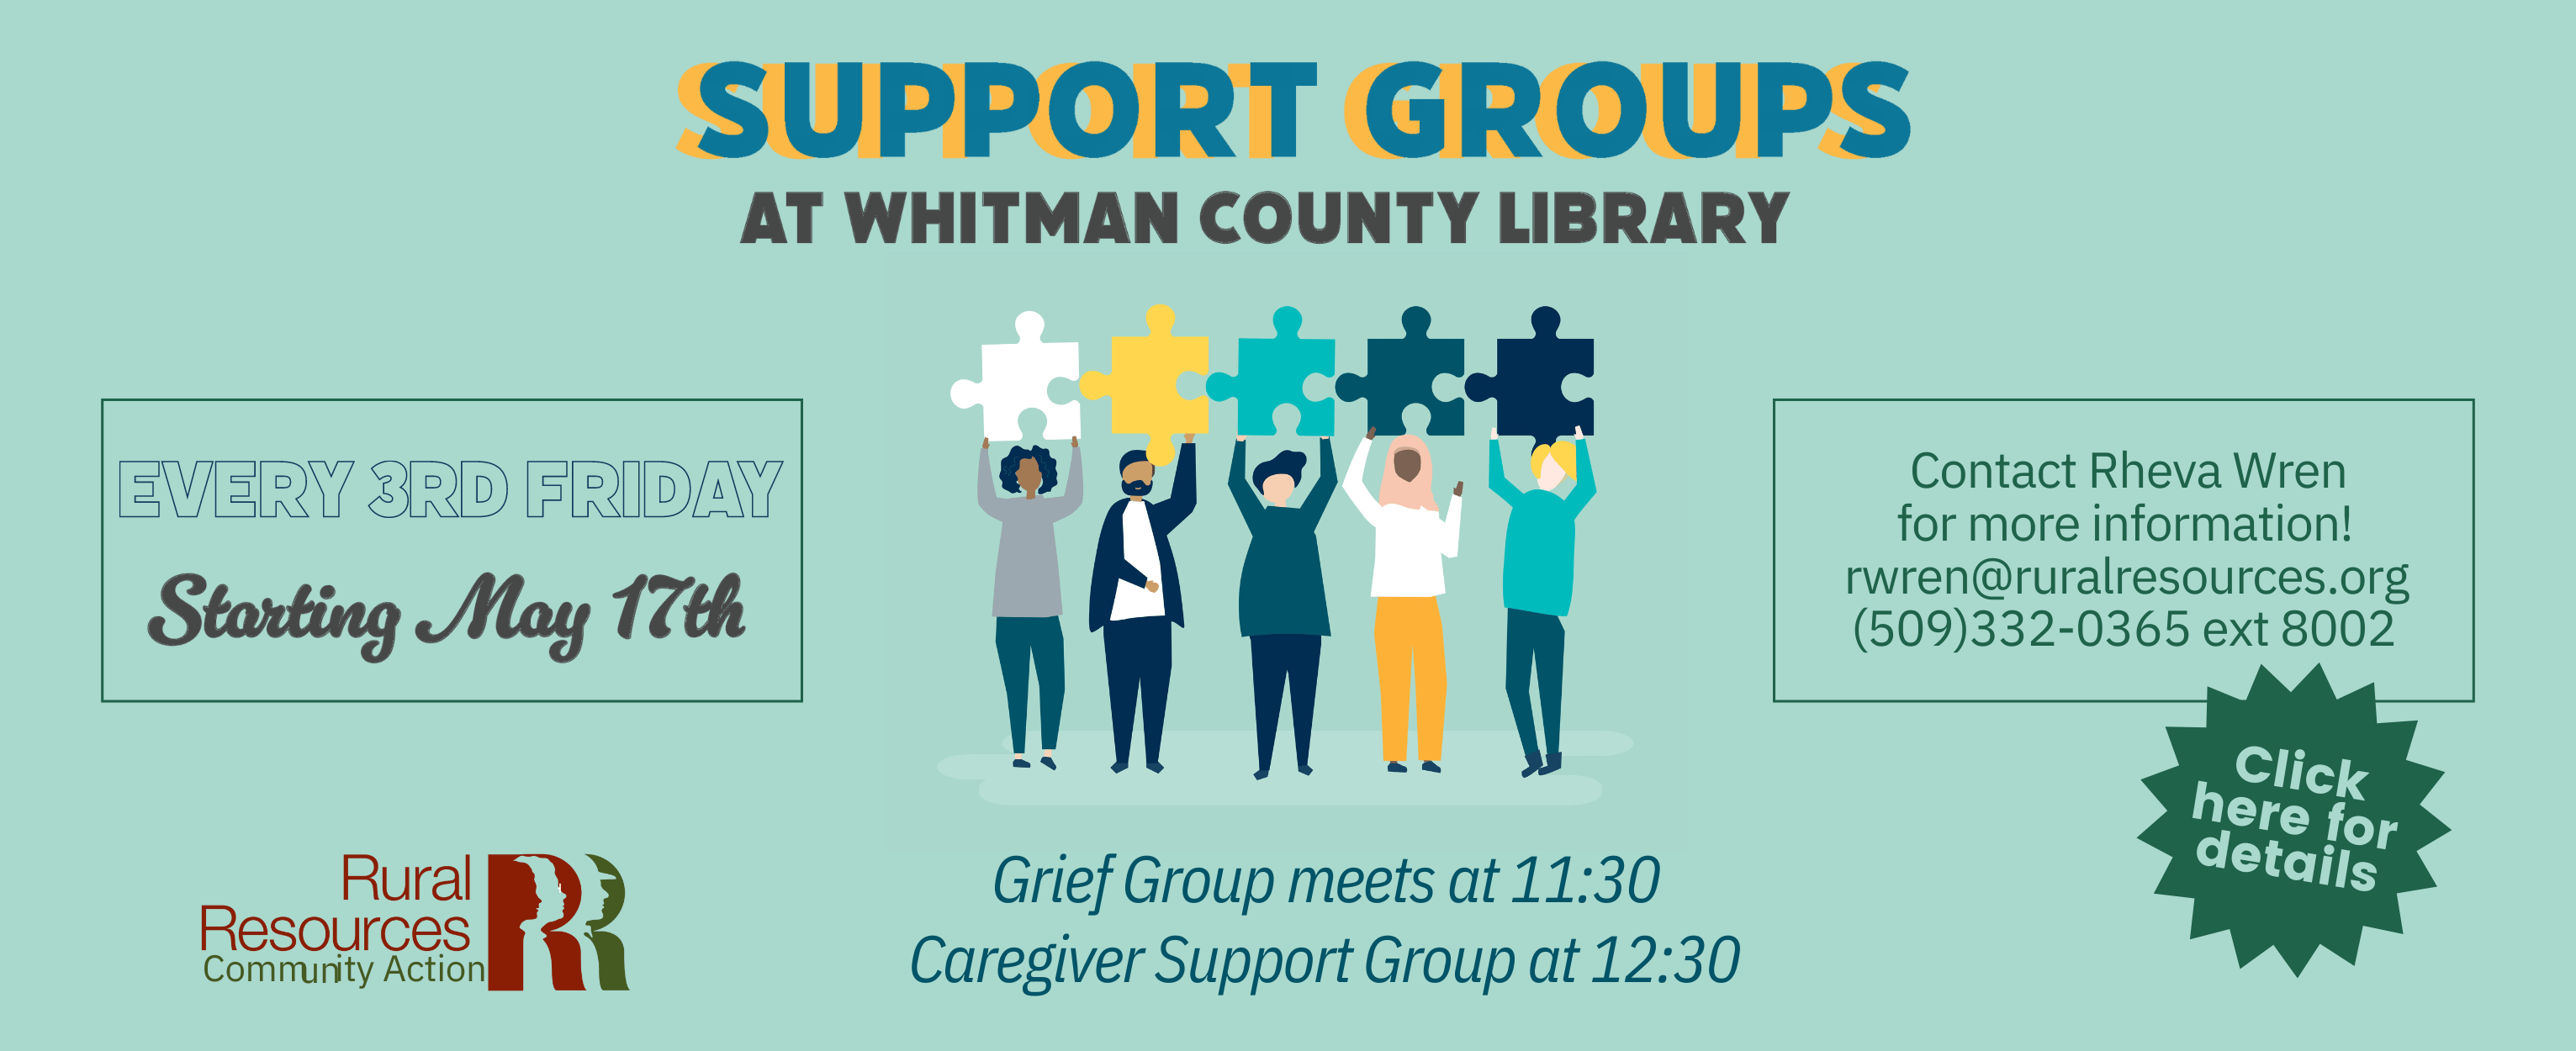 Join us and Rural Resources at the Colfax Library for a new Support Group series: one for those experiencing grief and one for caregivers. Click here for details.